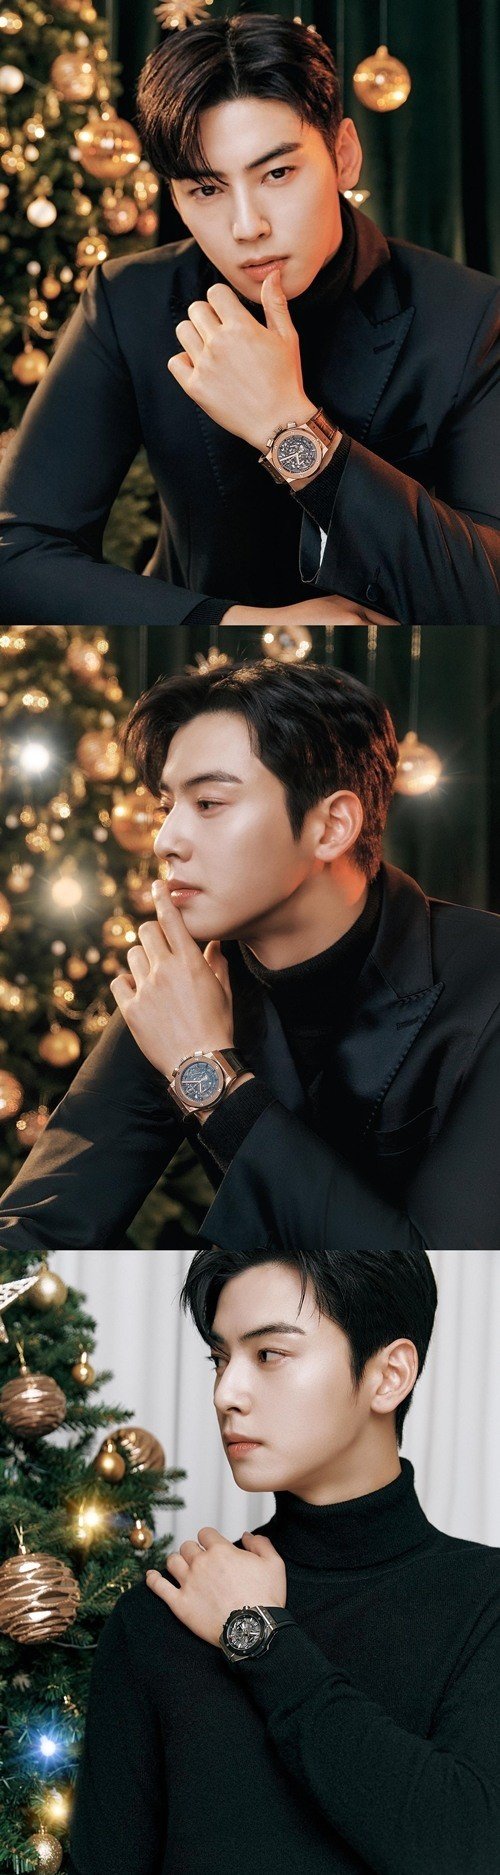 Cha Eun-woo posted an article on his Instagram on Happy Holiday on the 16th.The photo, which was released together, shows Cha Eun-woo, who is wearing a black necktie and taking a nice pose in the background of the Christmas tree.A sleek jawline, complete features catch the eye.Meanwhile, Cha Eun-woo has confirmed her appearance in the drama Ireland.